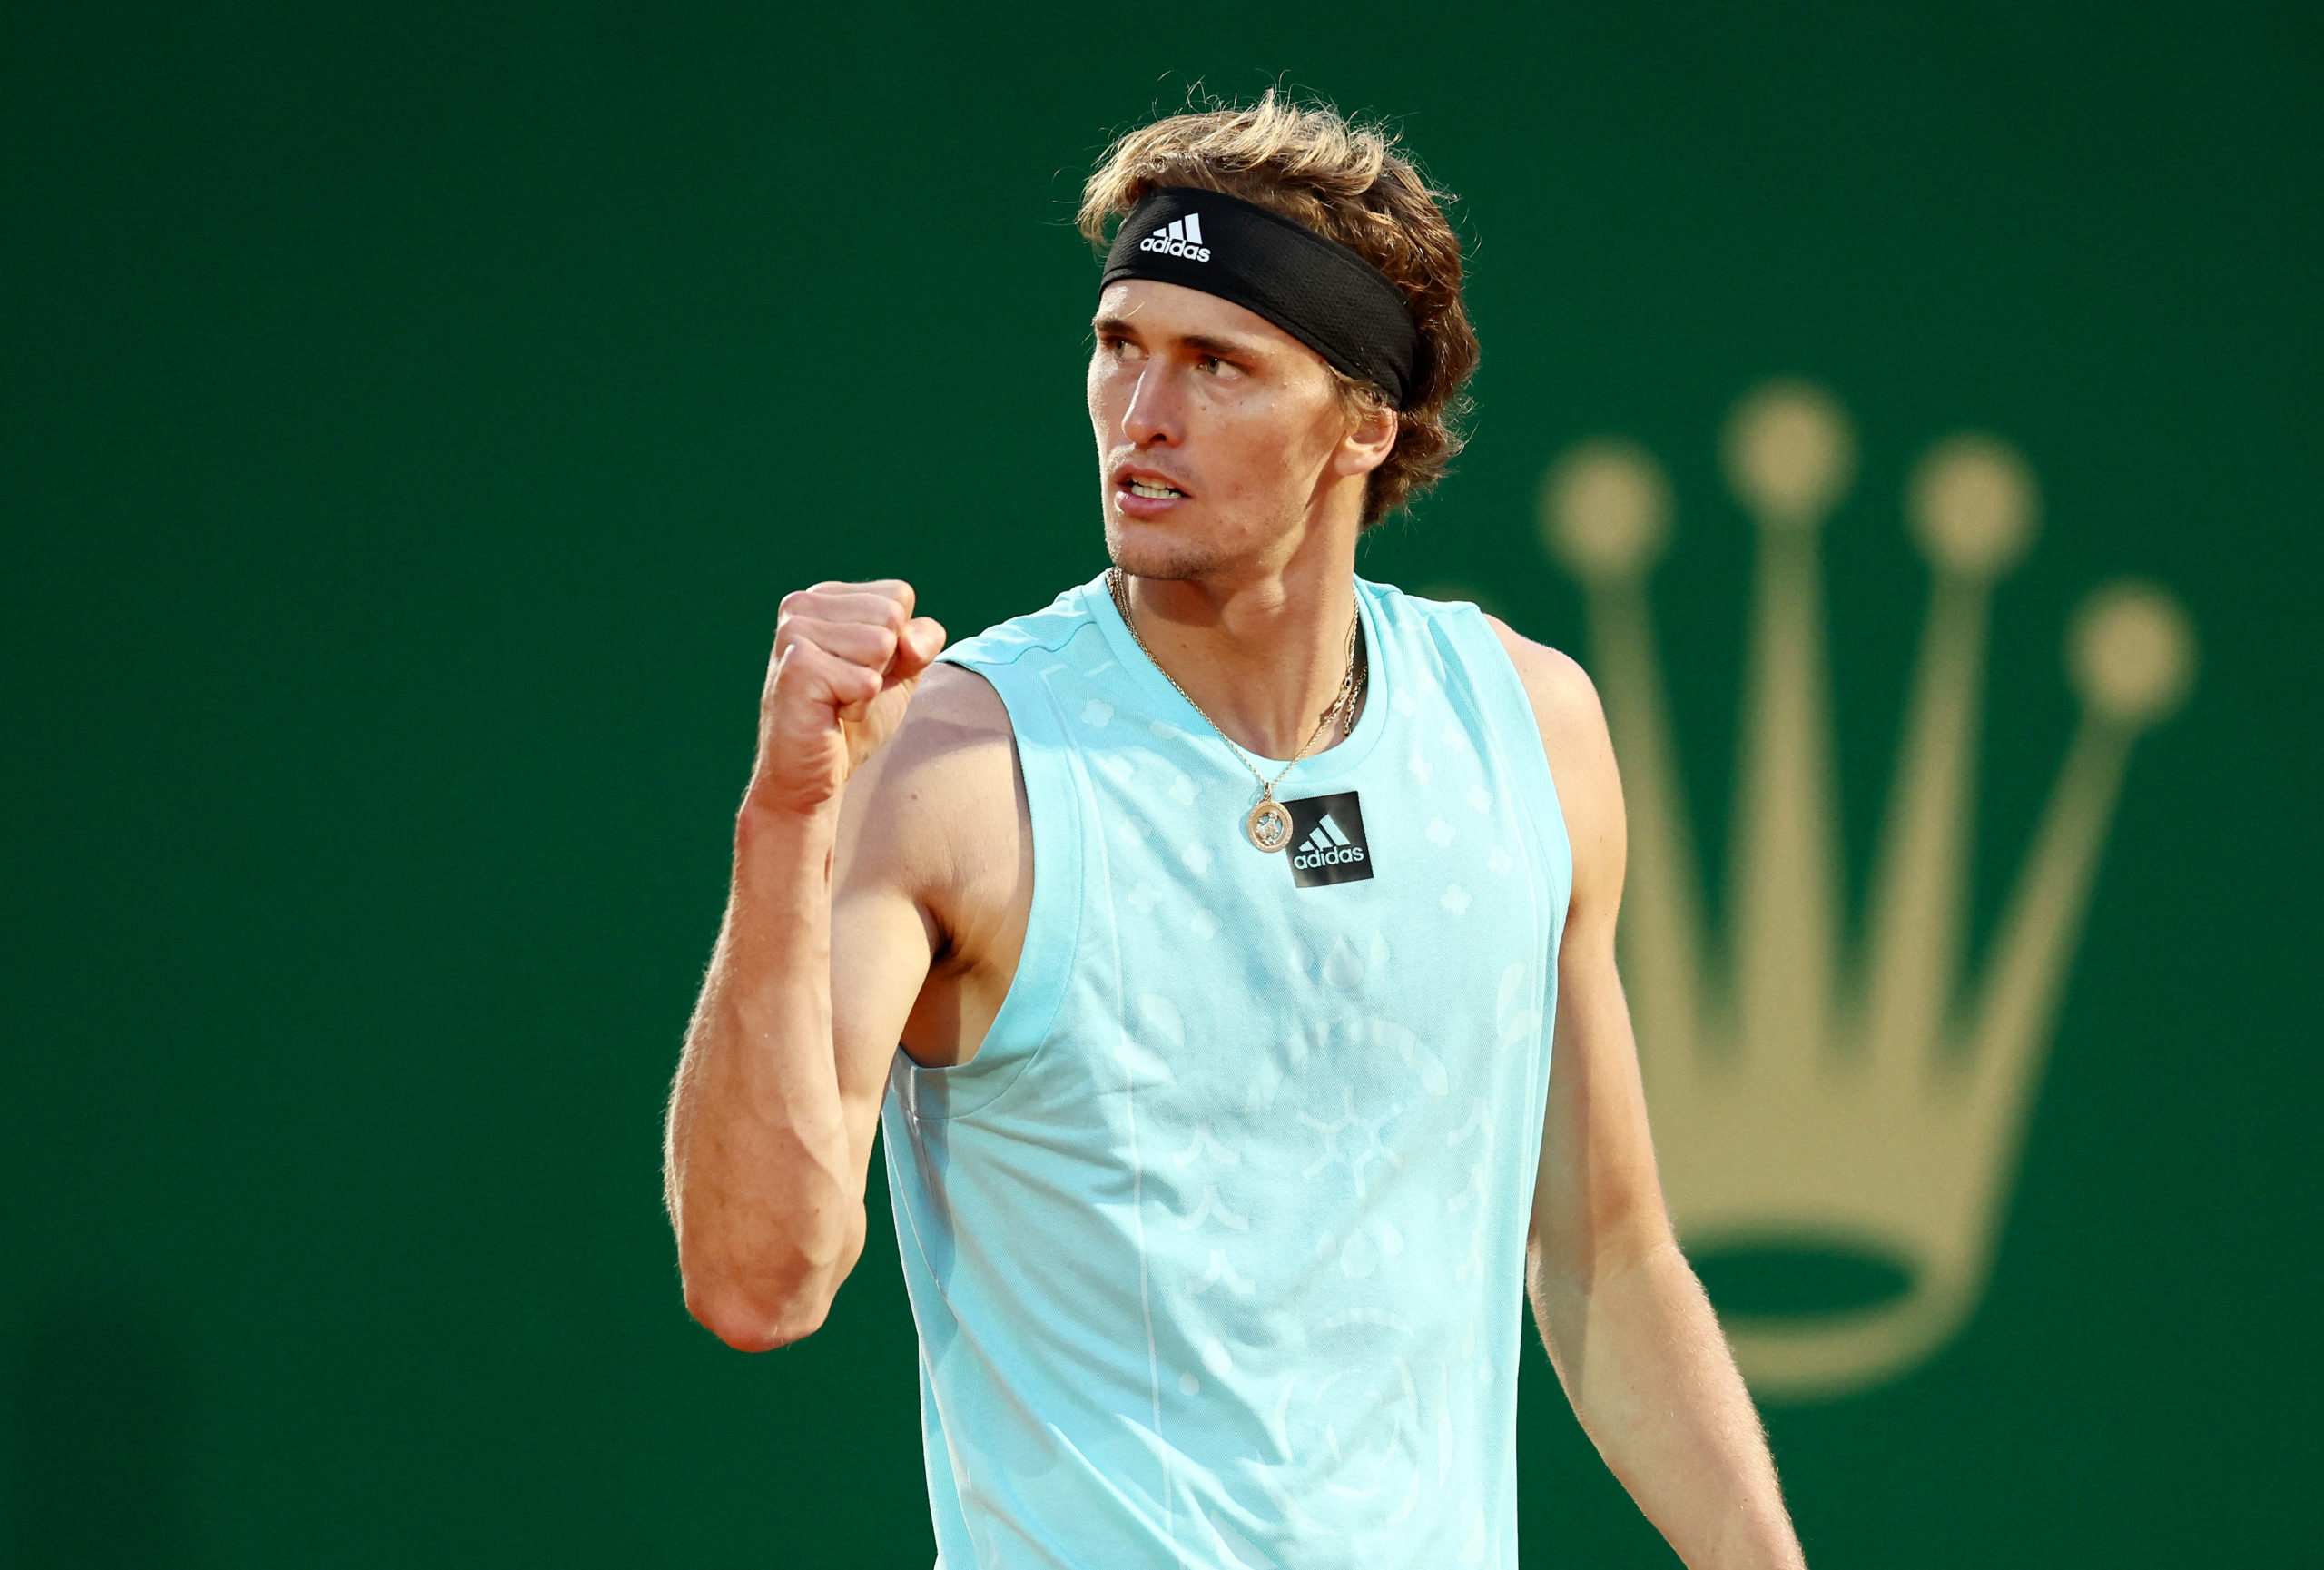 Tennis - ATP Masters 1000 - Monte Carlo Masters - Monte-Carlo Country Club, Roquebrune-Cap-Martin, France - April 13, 2022 Germany's Alexander Zverev reacts during his second round match against Argentina's Federico Delbonis